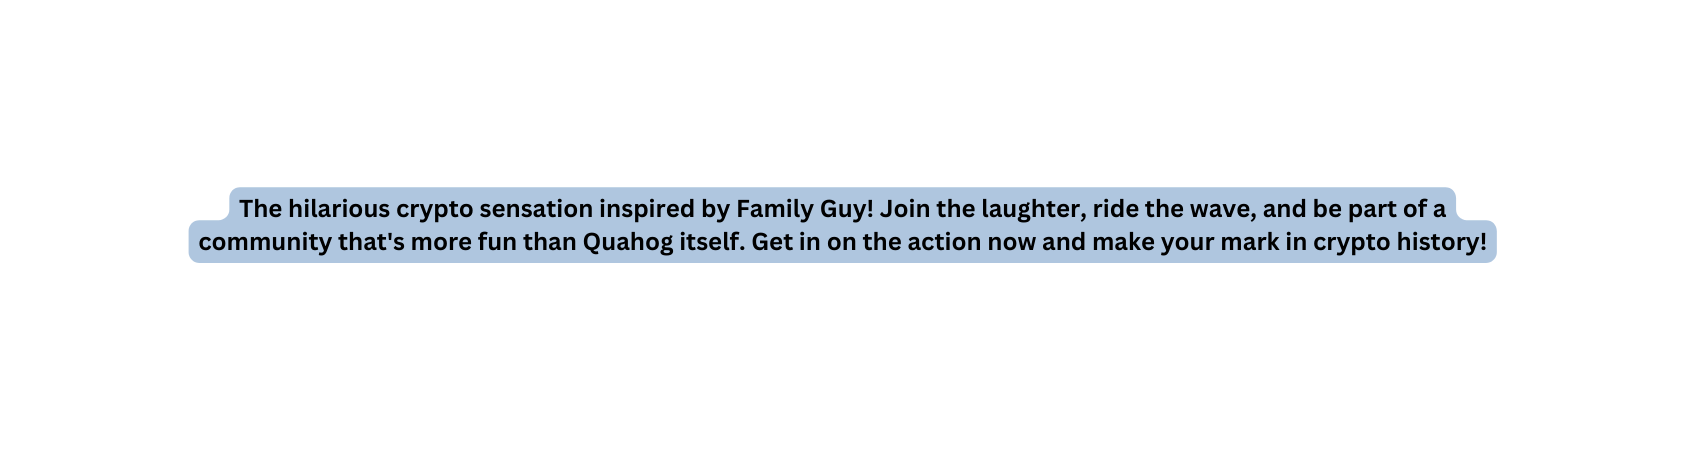 The hilarious crypto sensation inspired by Family Guy Join the laughter ride the wave and be part of a community that s more fun than Quahog itself Get in on the action now and make your mark in crypto history